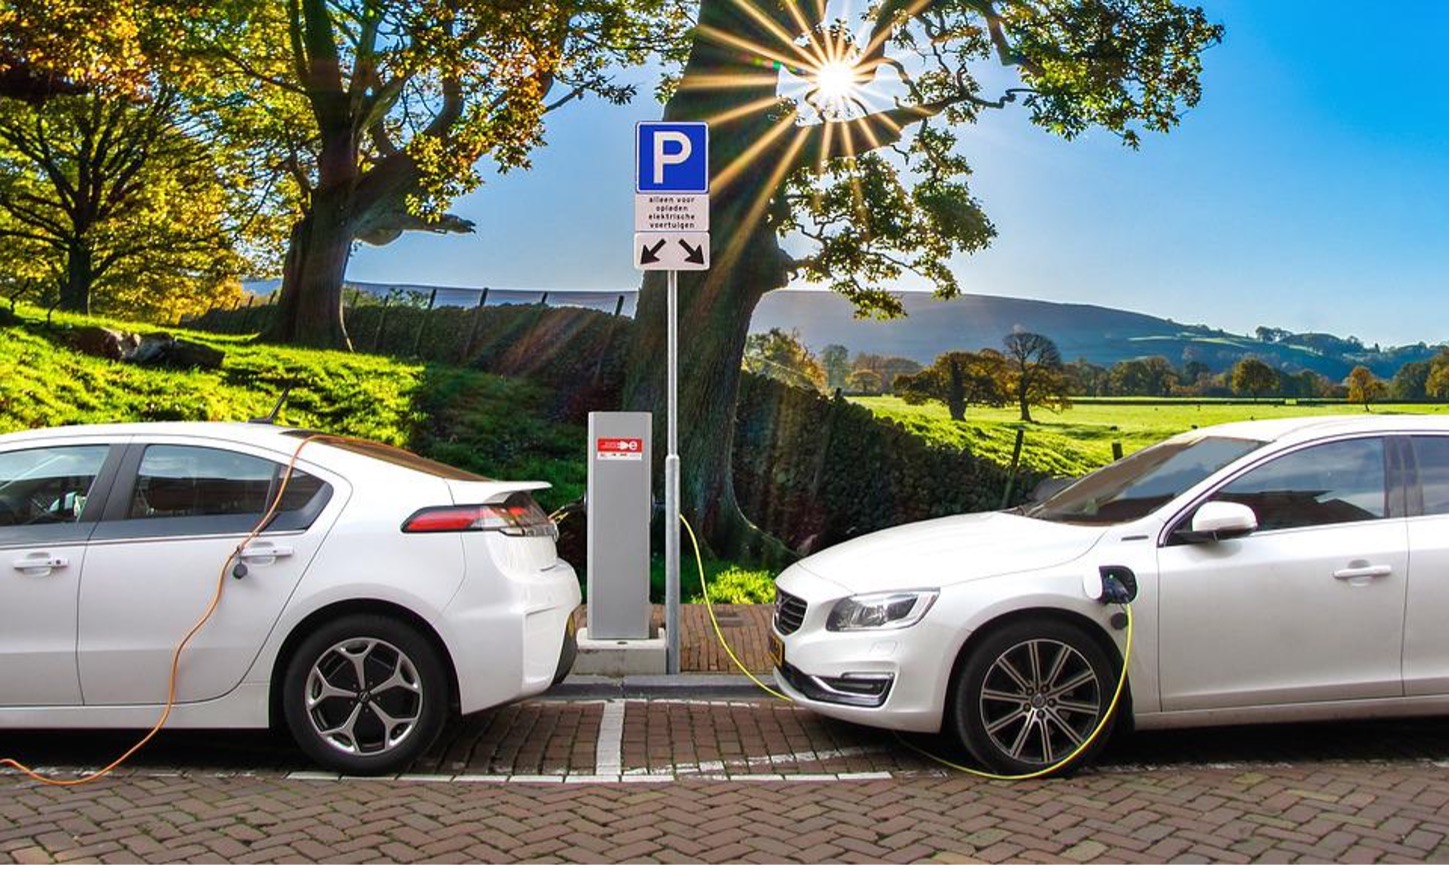 Two white electric and hybrid cars are connected to a charging port in the daytime with a grassy field, trees, and mountains in the background.